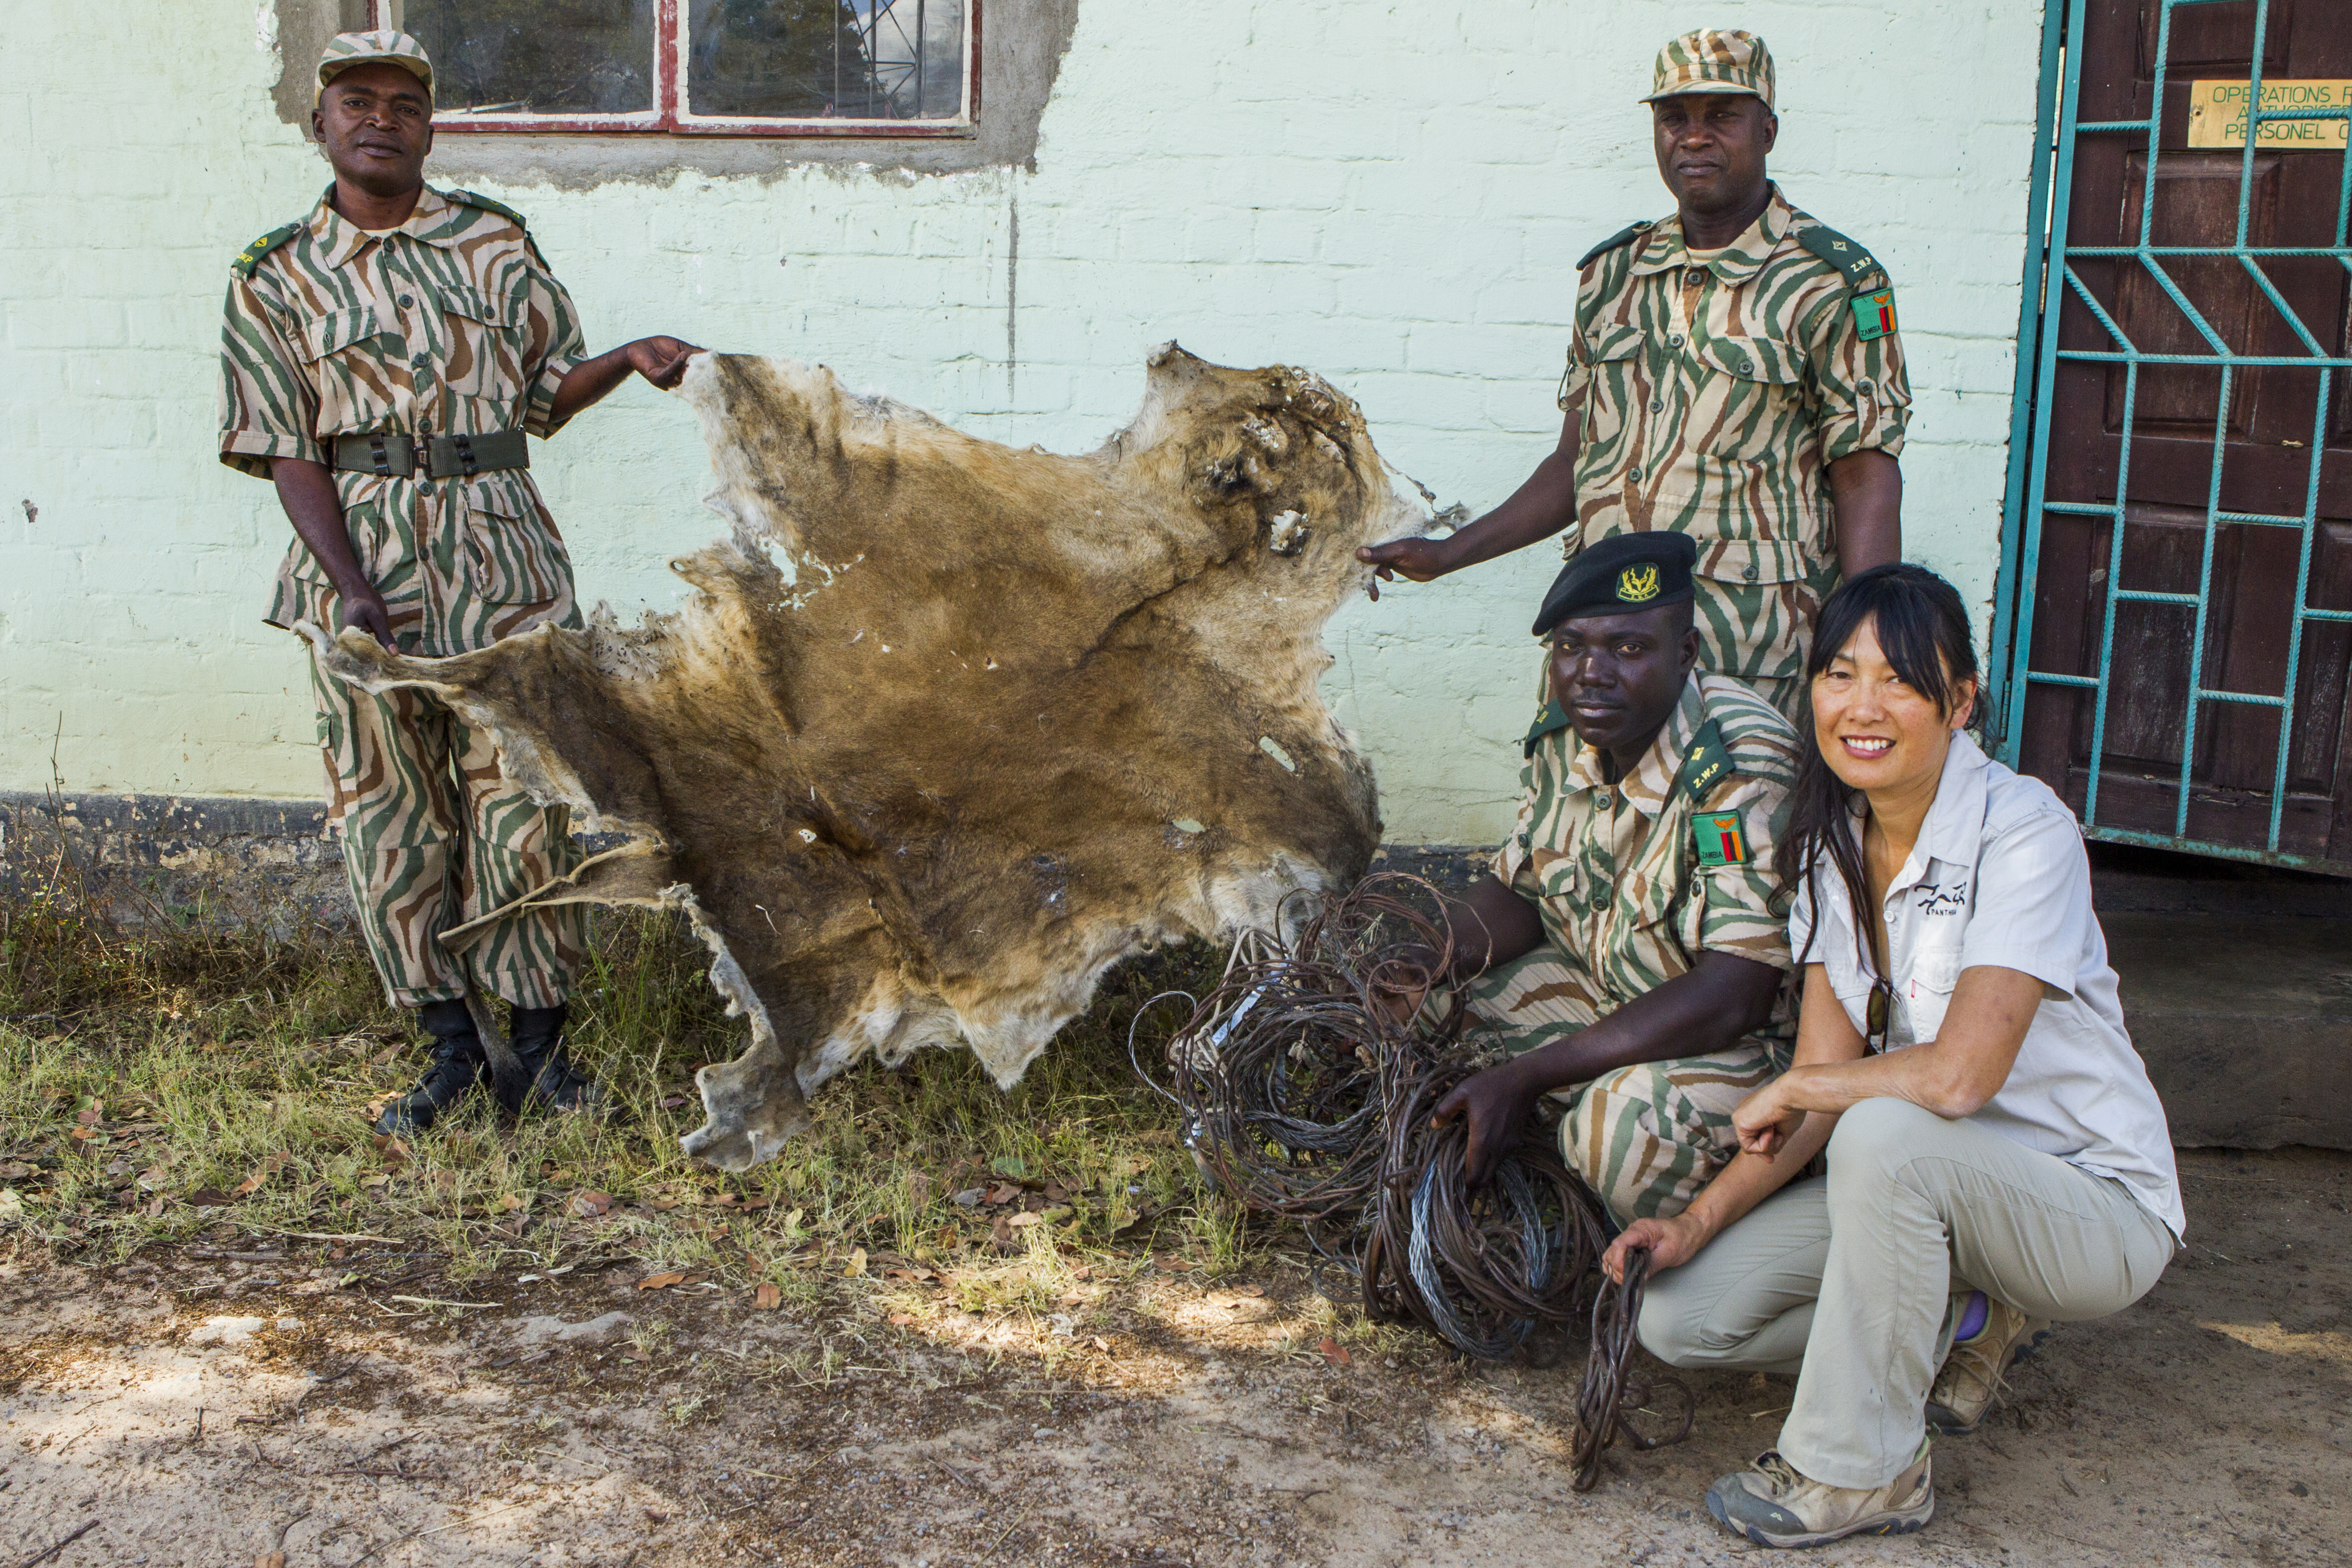 "African Lion (Panthera leo) biologist, KIm Young-Overton, with anti-poaching commanders who confiscated lion skin and snares used by poacher, Kafue National Park, Zambia"